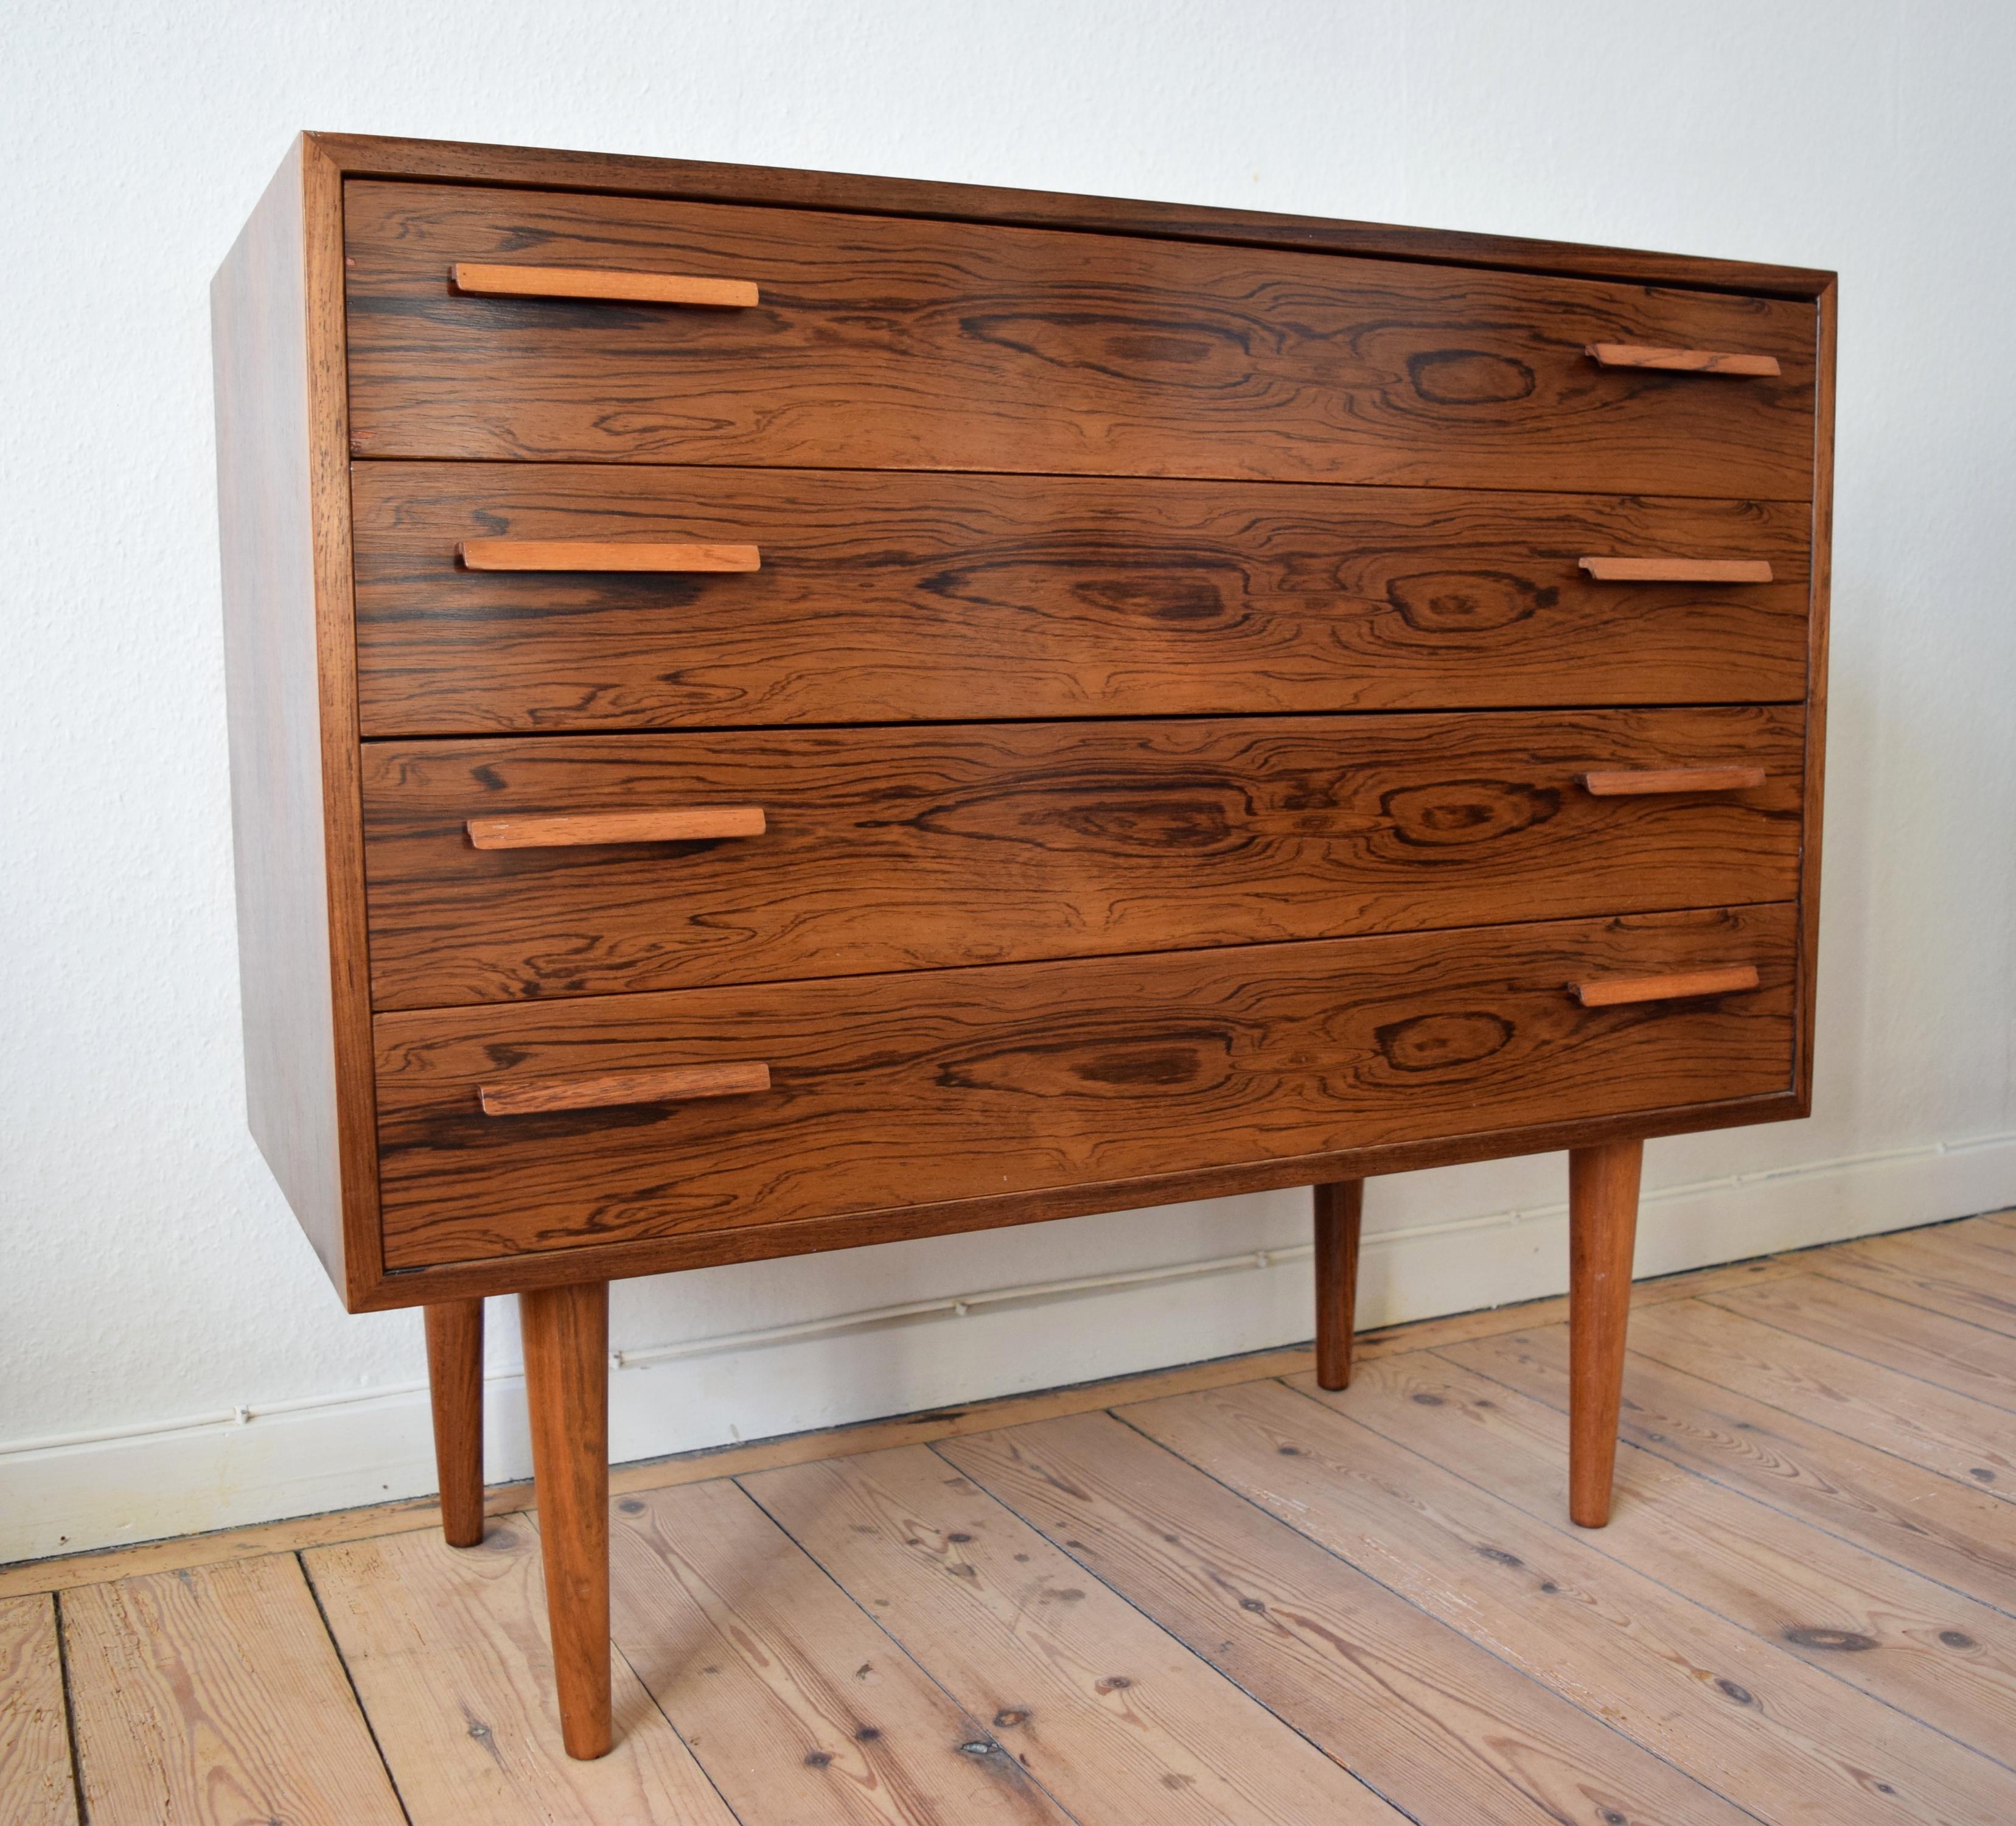 Danish rosewood chest of drawers by Kai Kristiansen for FM Møbler. Manufactured in the 1960s, this piece features four smooth sliding drawers with solid rosewood handles. Sits on turned and tapered solid rosewood legs. Striking rosewood grain